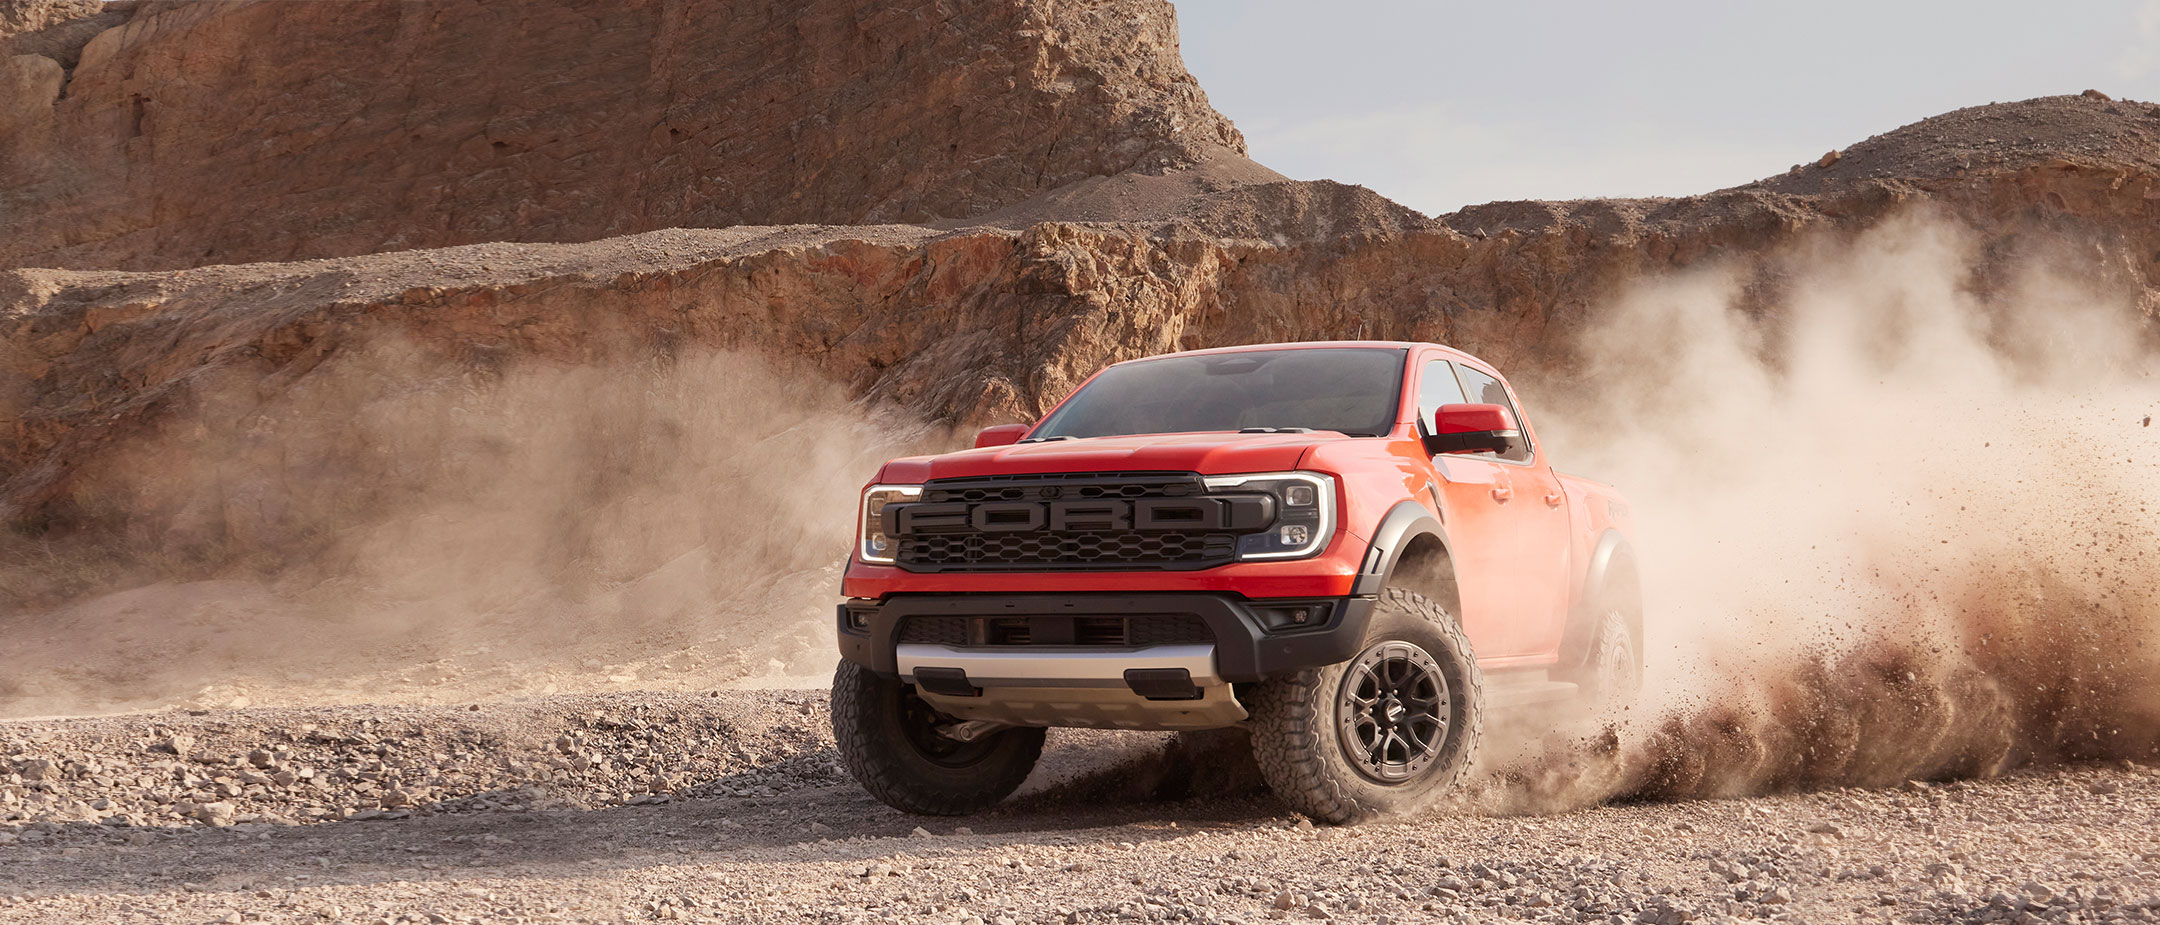 All-New Ford Ranger front view driving rocky terrain